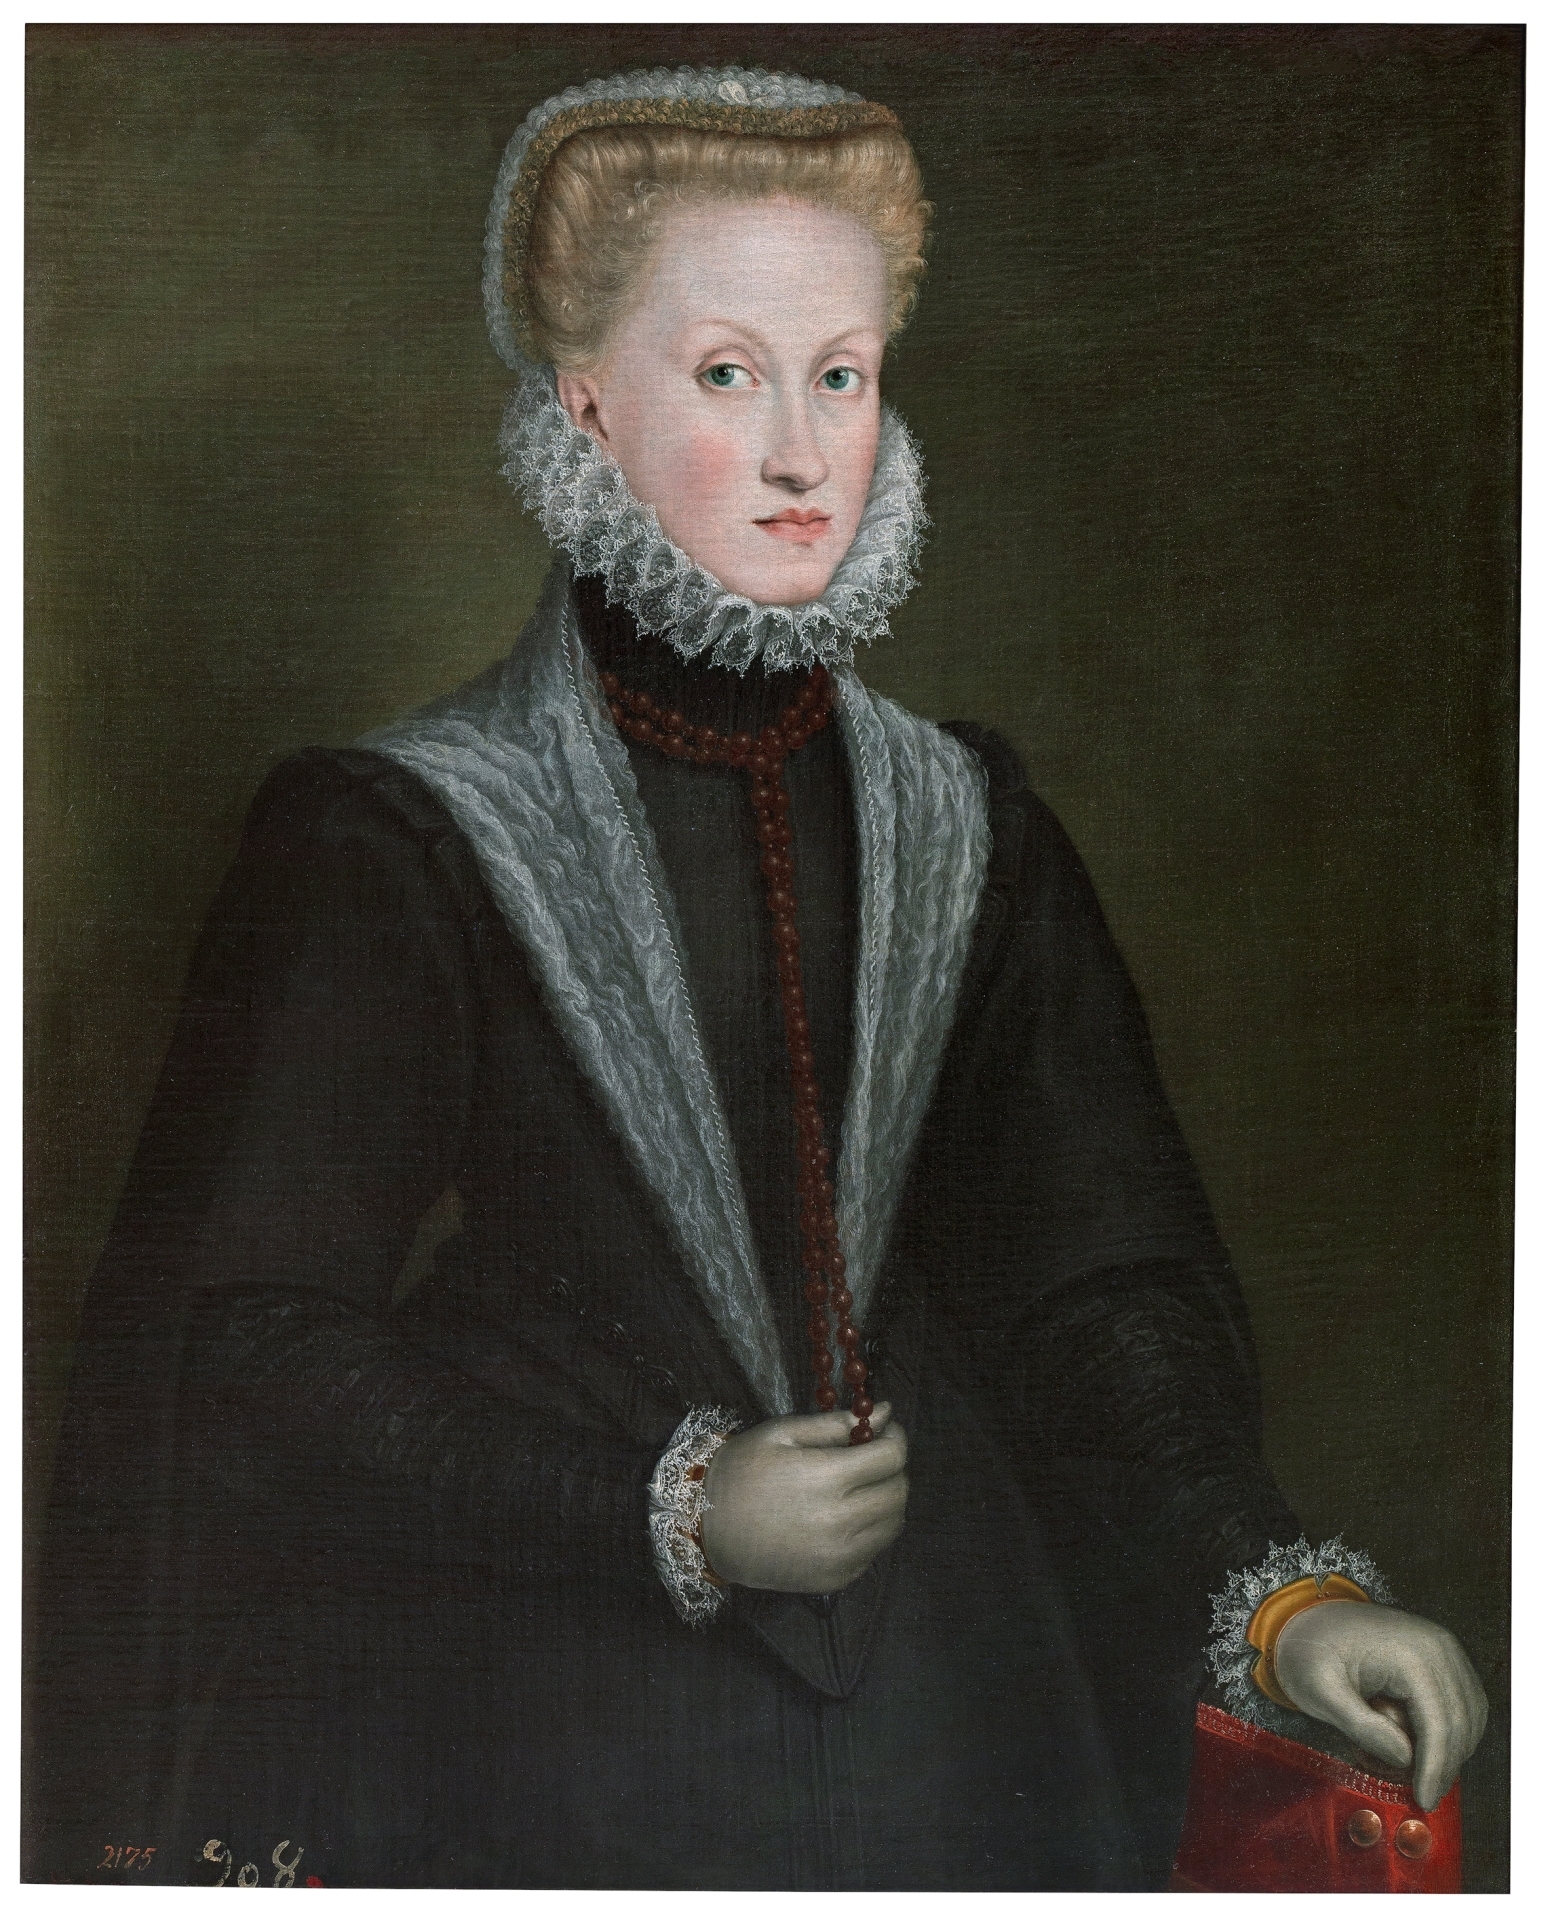 A half-length portrait of a women wearing a black dress with a lace shawl and lace at her sleeves and high collar. She is wearing a red beaded necklace and she holds it with her right hand. She looks out directly at the viewer with a confident, neutral expression.